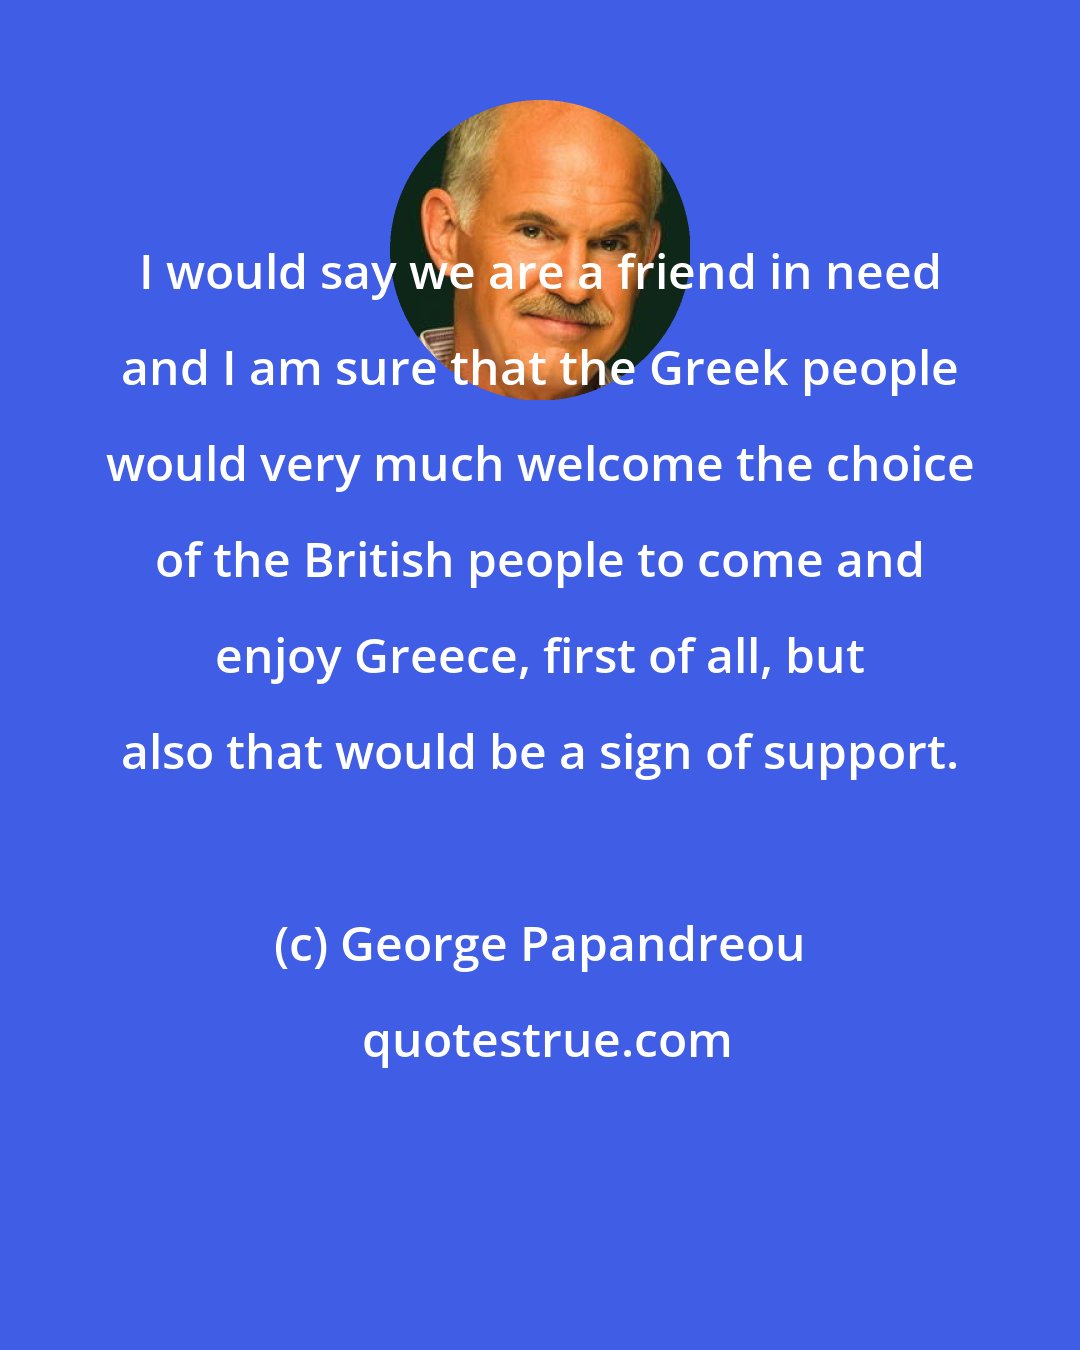 George Papandreou: I would say we are a friend in need and I am sure that the Greek people would very much welcome the choice of the British people to come and enjoy Greece, first of all, but also that would be a sign of support.